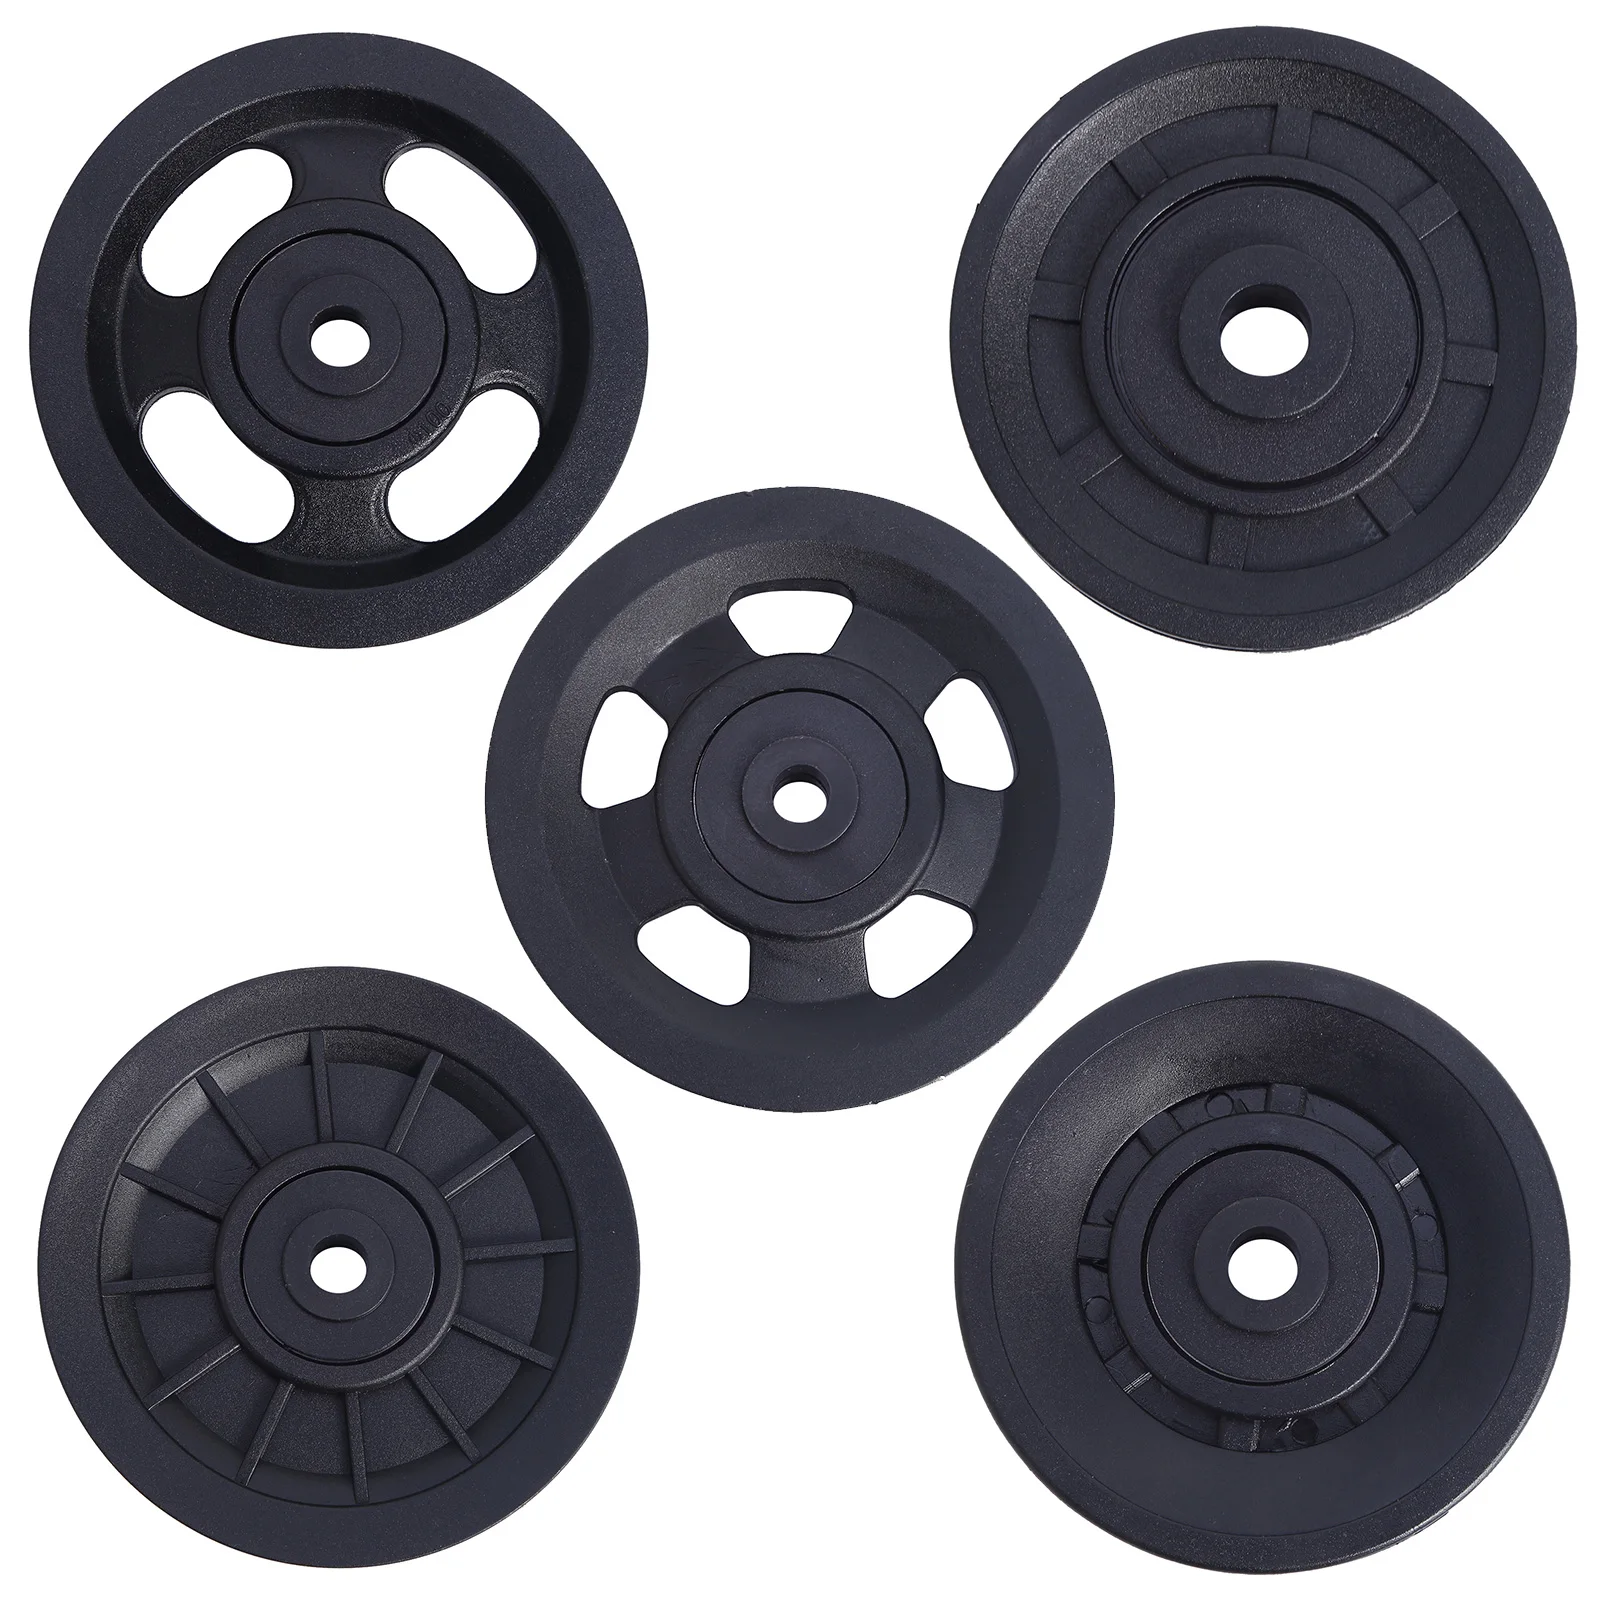 1pc 100mm Black bearing pulley Wheel cable Gym equipment part Wear _ Yu